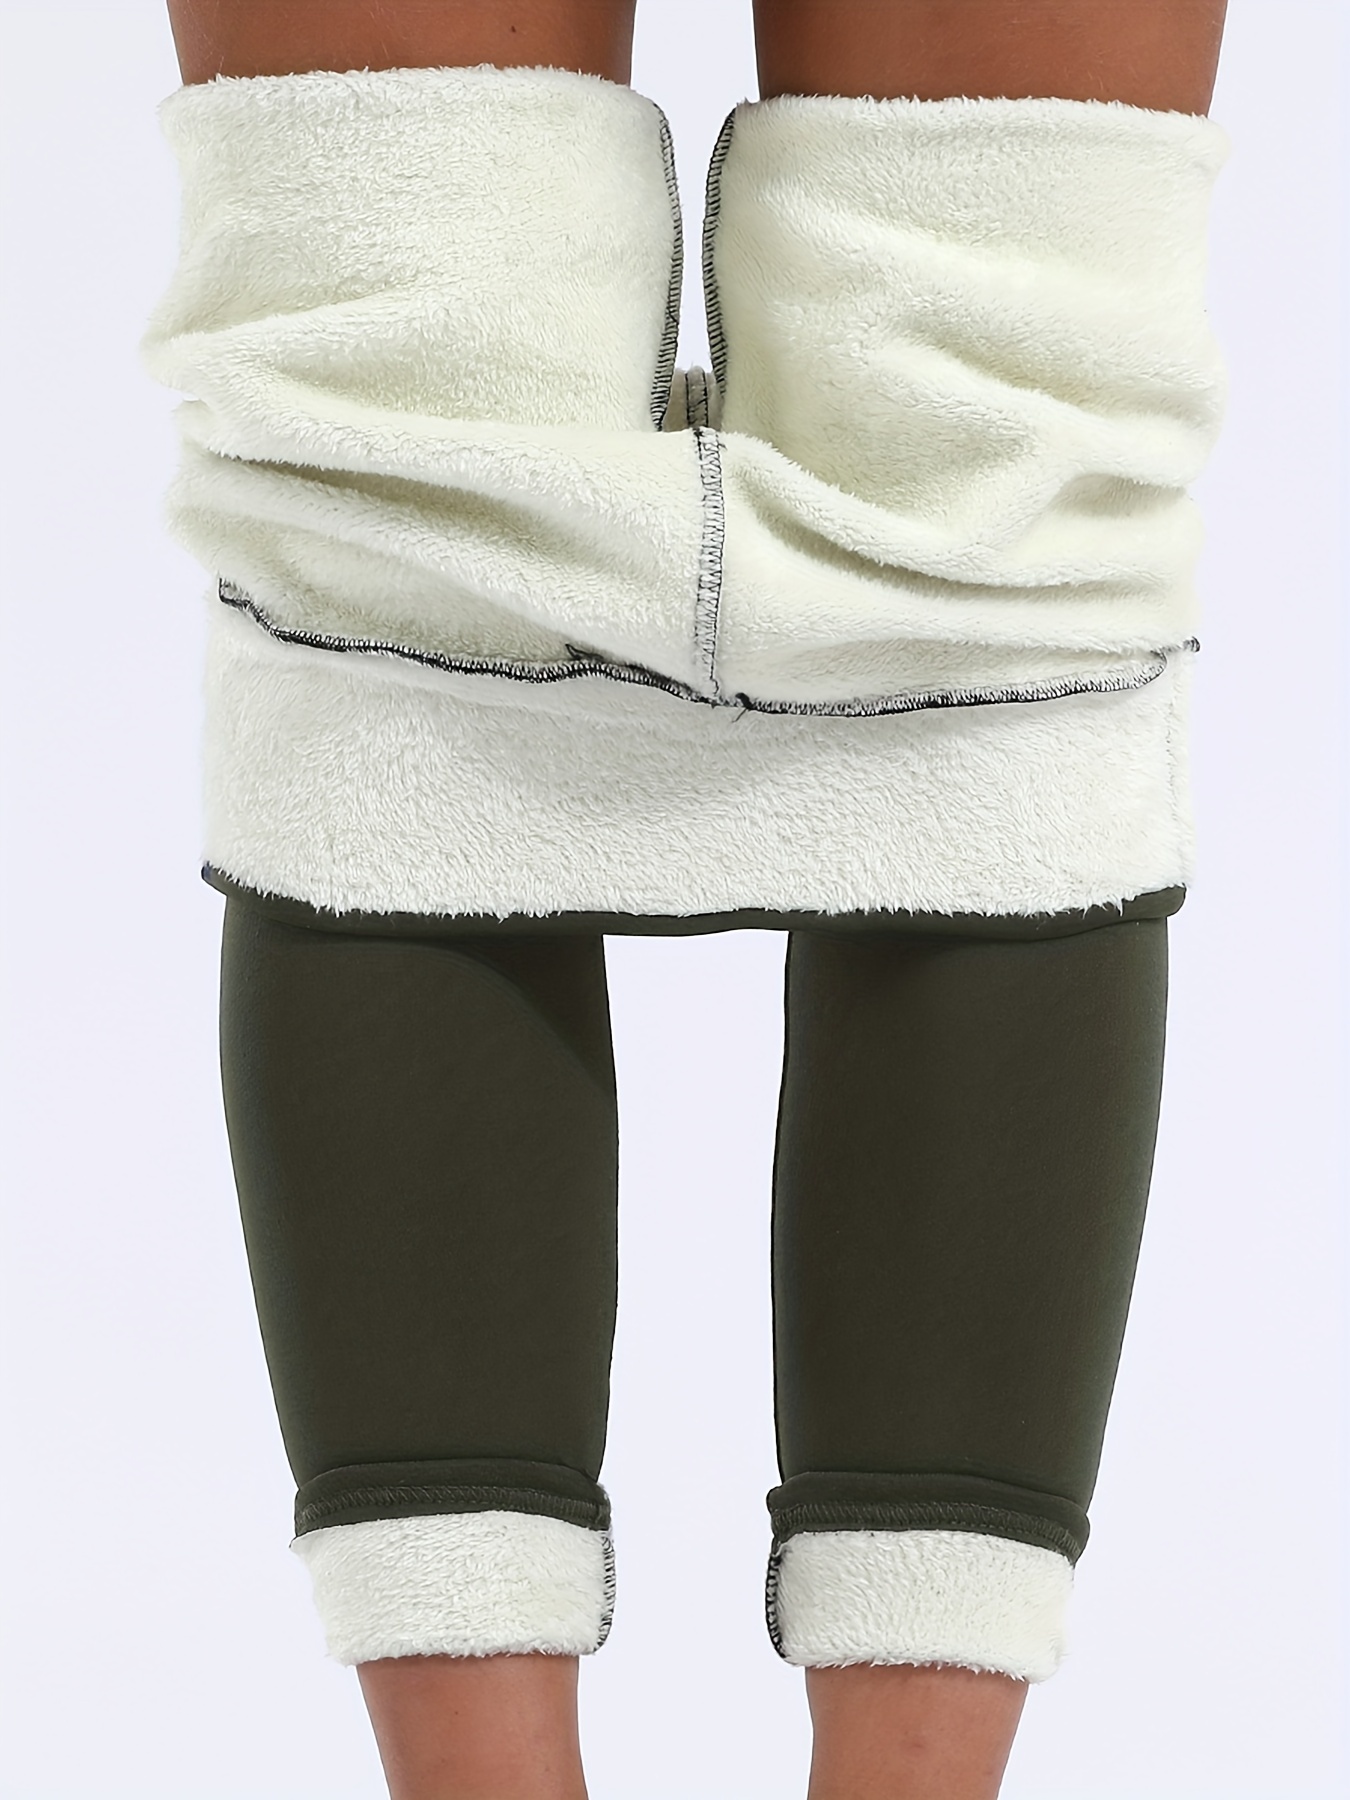 Tights Winter Wool 2.0 for women